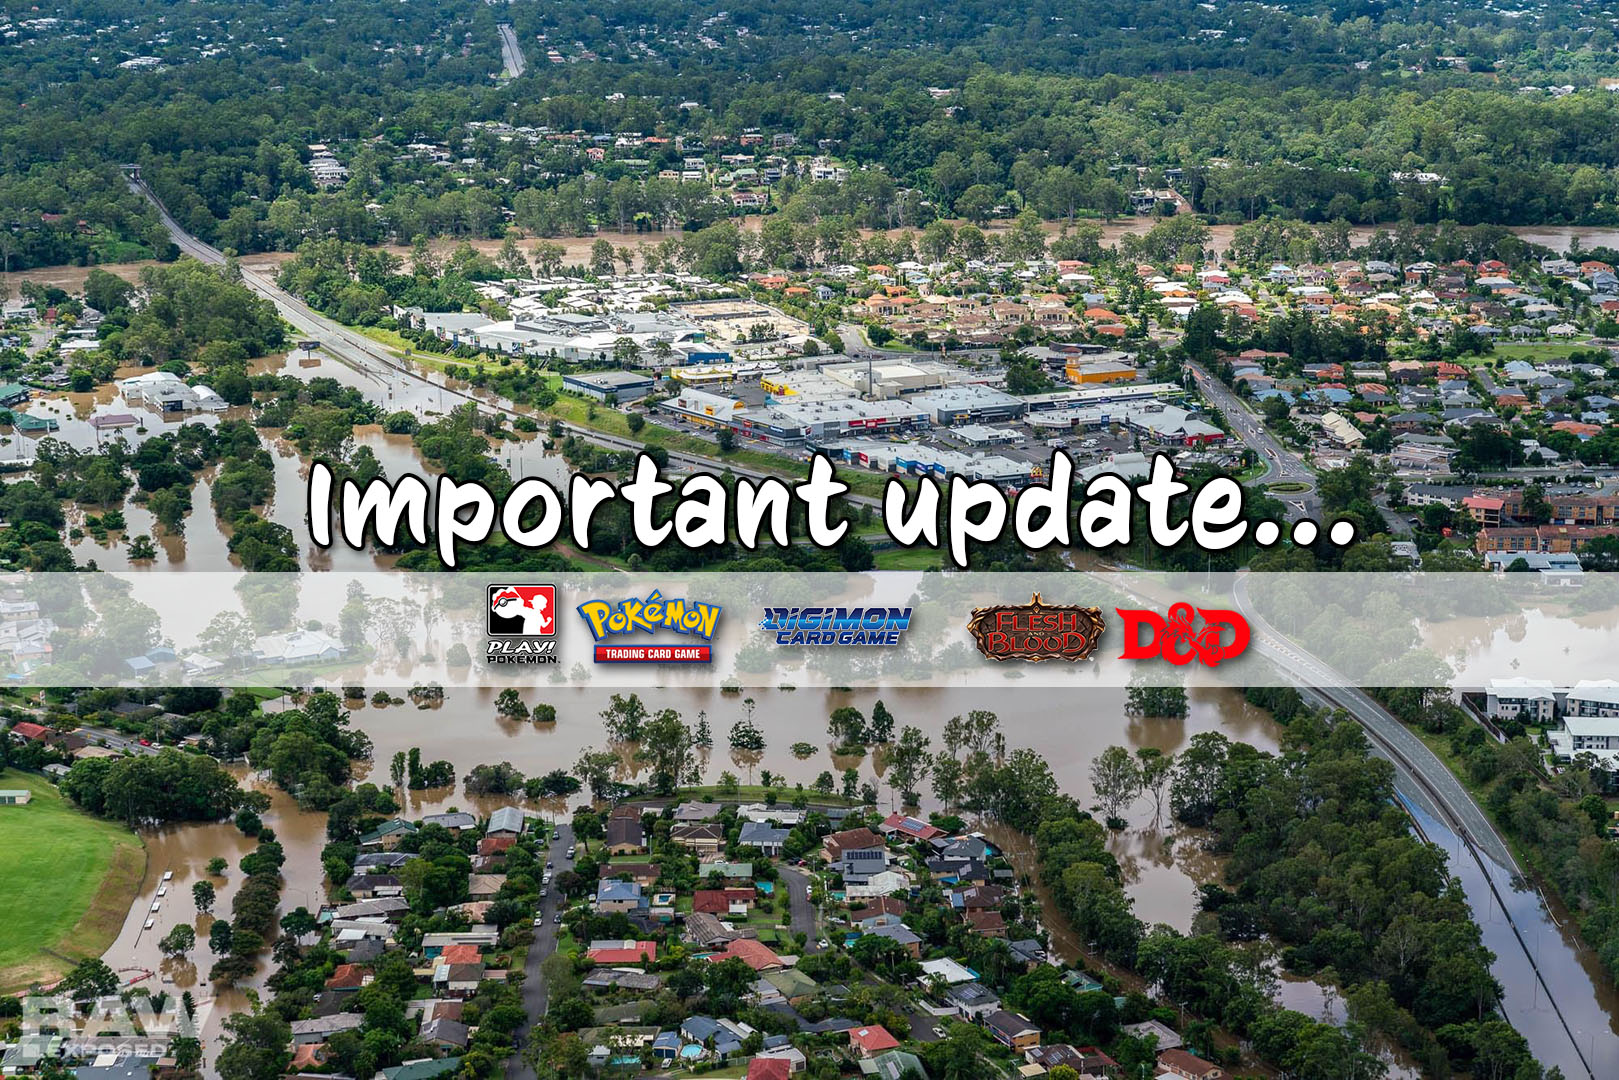 Latest important updates on events and operations